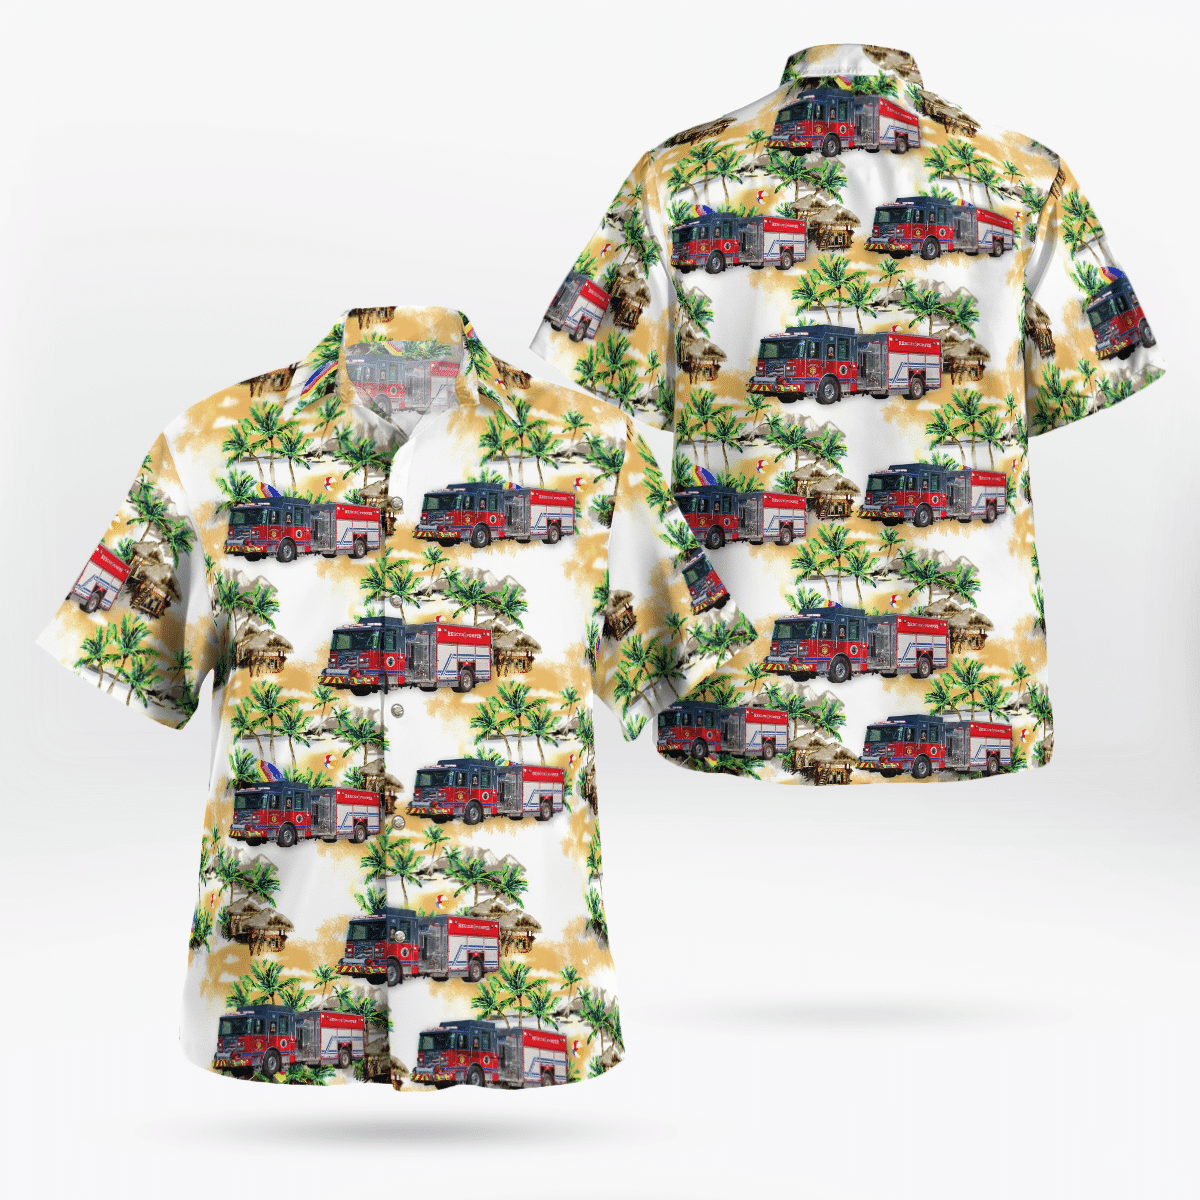 Shop now to find the perfect Hawaii Shirt for your hobby 153